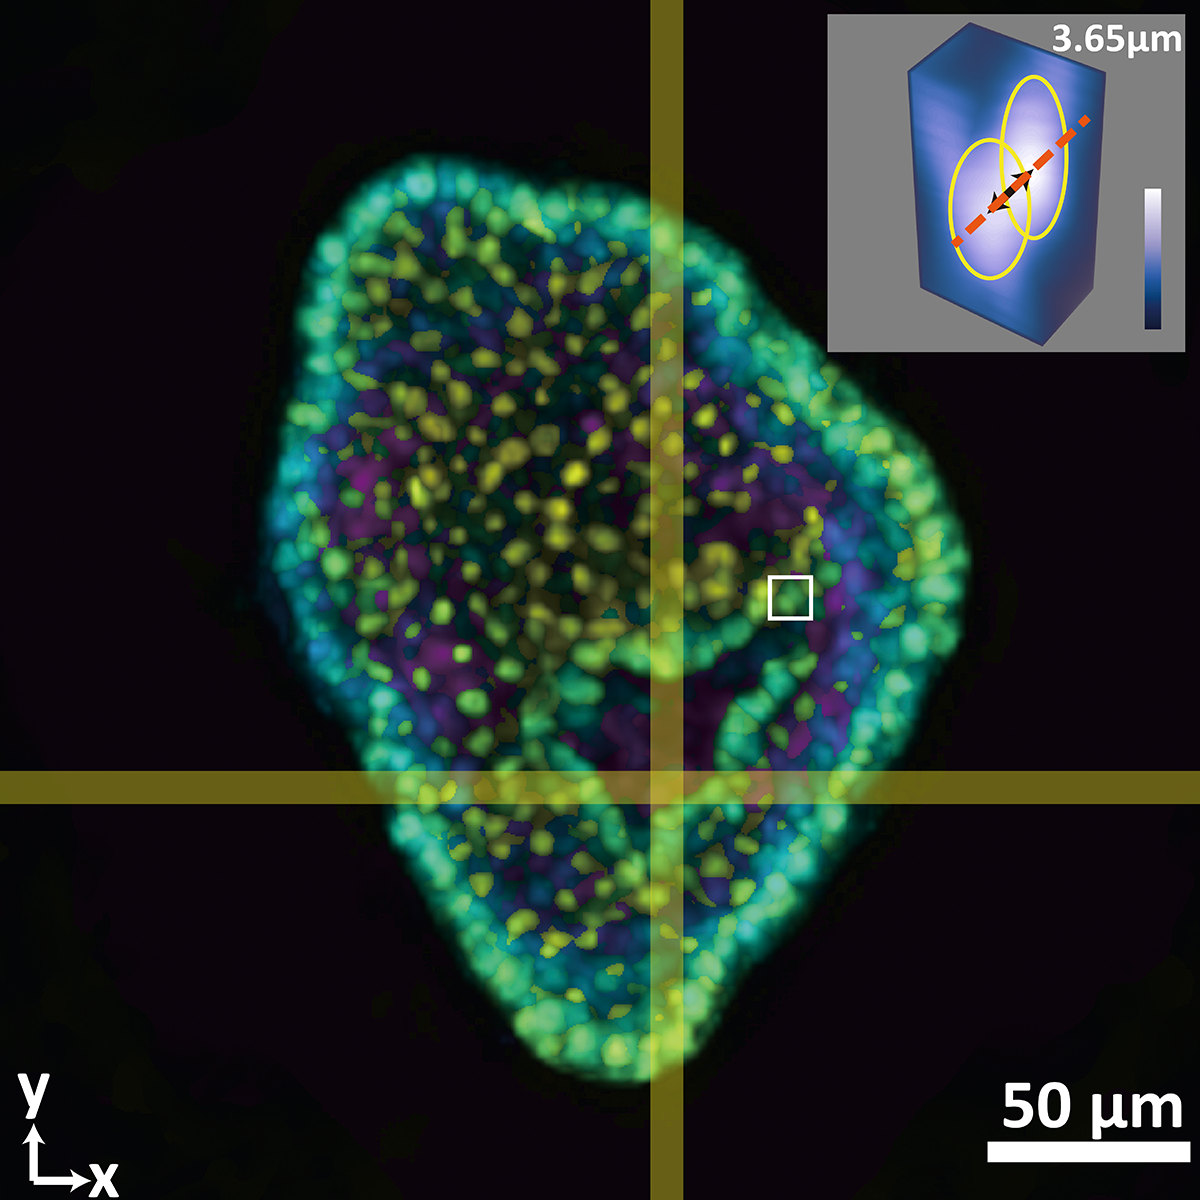 This composite image shows a colon organoid with stained cell nuclei reconstructed from a raw image taken by a new system developed in the Coulter Department. The large image shows depth color coded from yellow (-56.2 micrometers from the focal plane) to purple (+56.2 micrometers from the focal plane). The inset shows a tight crop of the distance between two cells of 3.65 micrometers. The single raw image was captured in 0.1 seconds. (Image Courtesy: Shu Jia & Wenhao Liu)